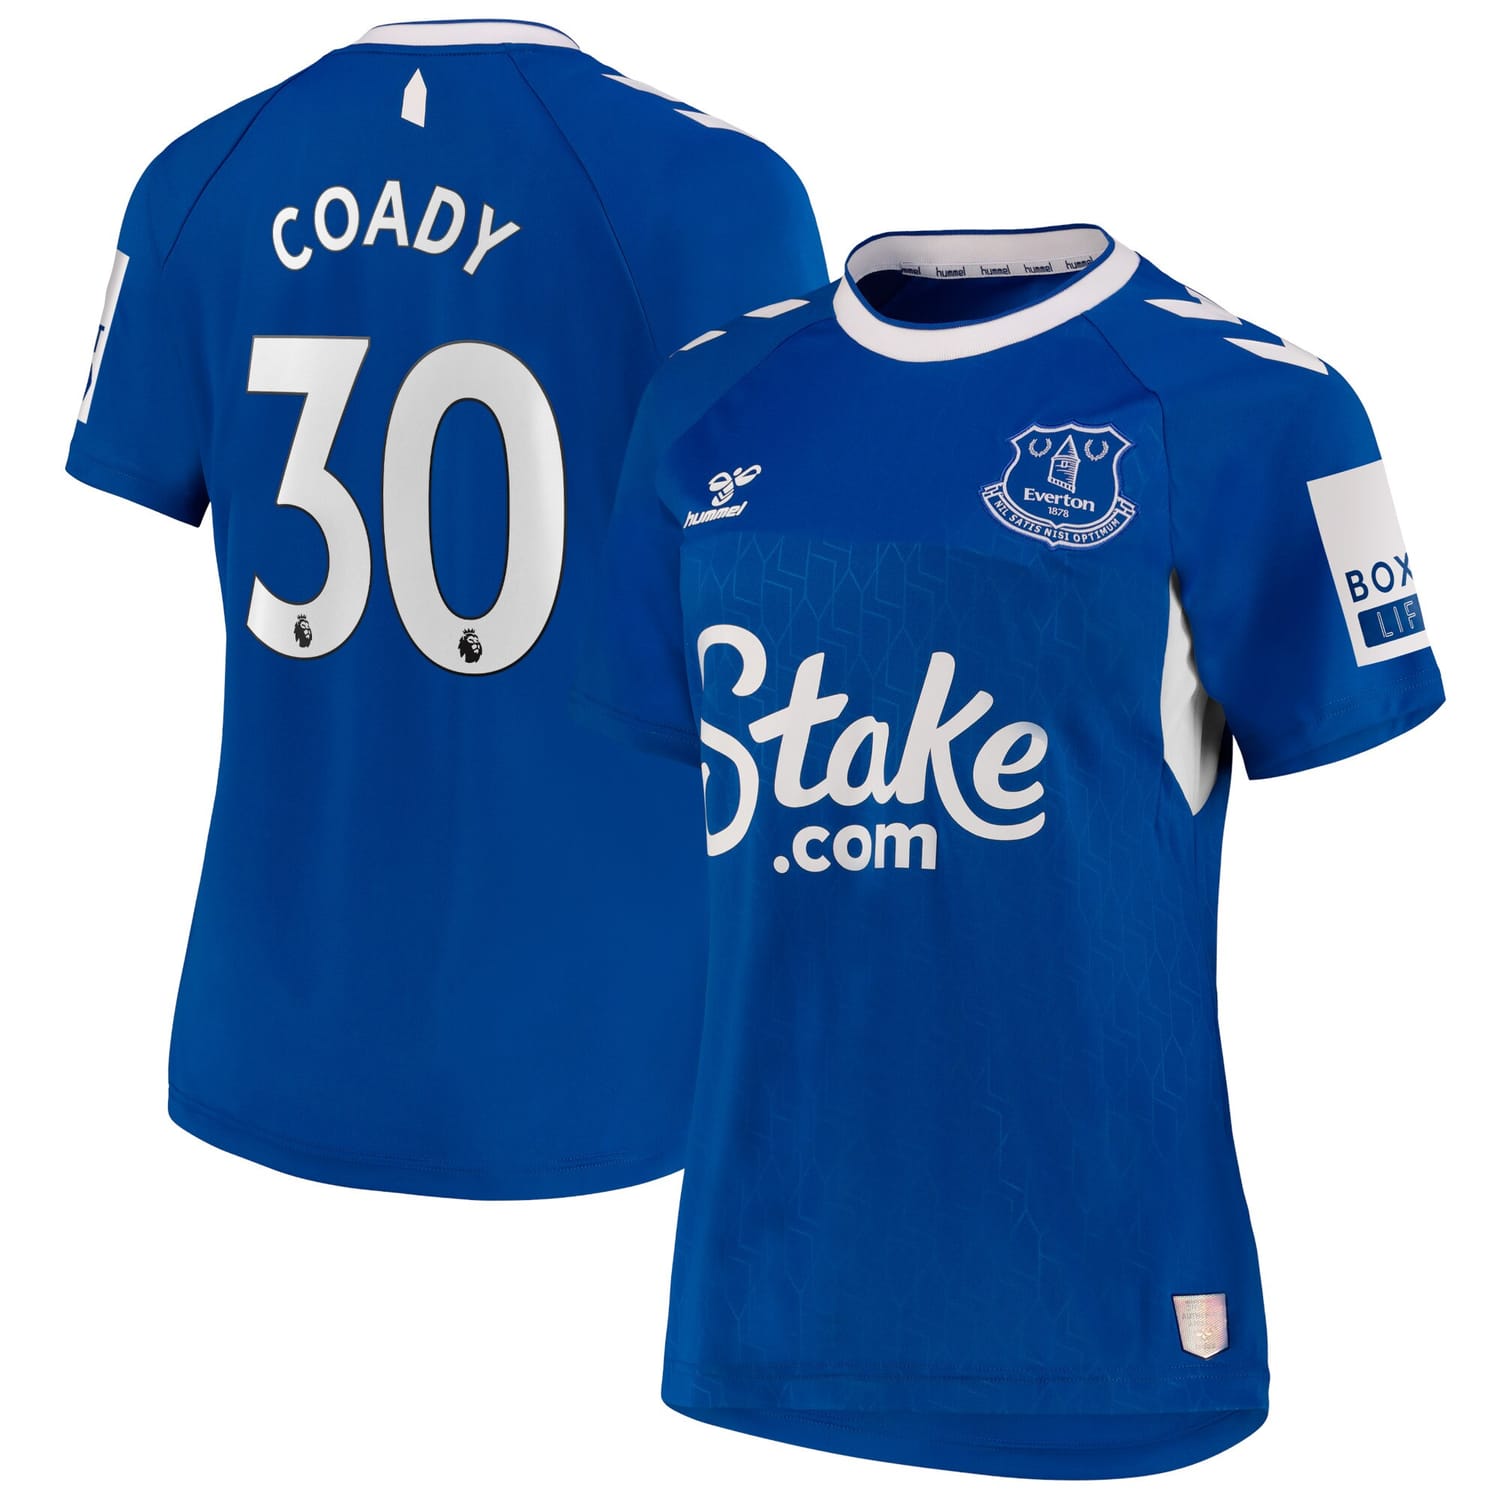 Premier League Everton Home Jersey Shirt 2022-23 player Conor Coady 30 printing for Women